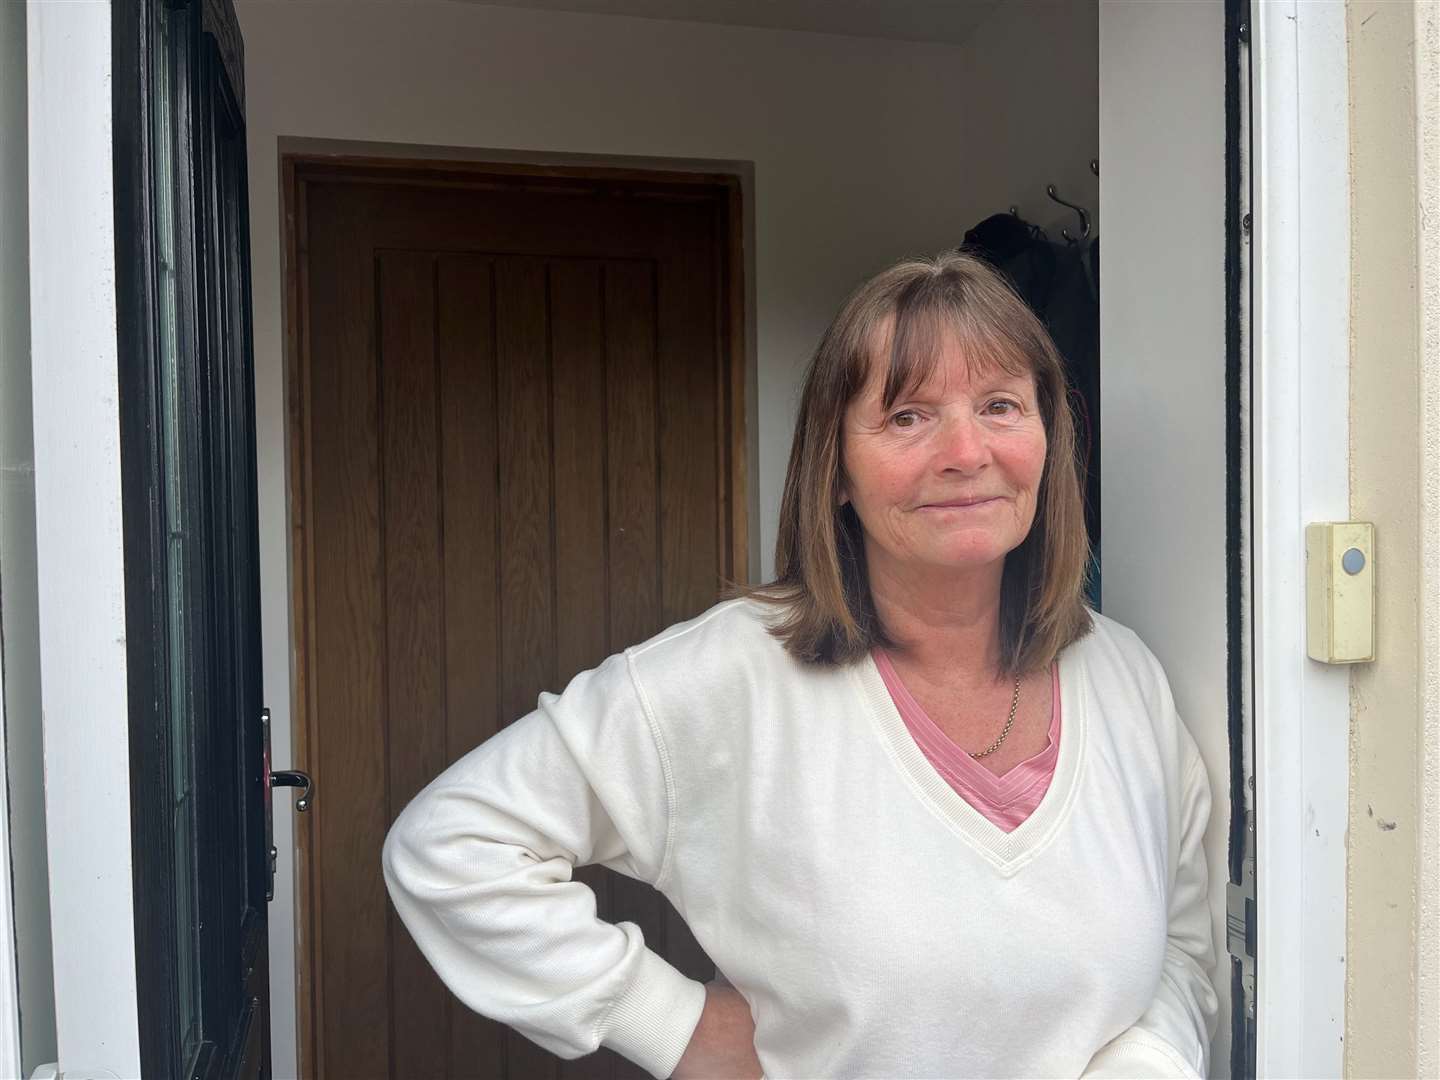 Christine Breeds has lived in Pound Lane for almost 50 years and says the tankers have always been coming down the road